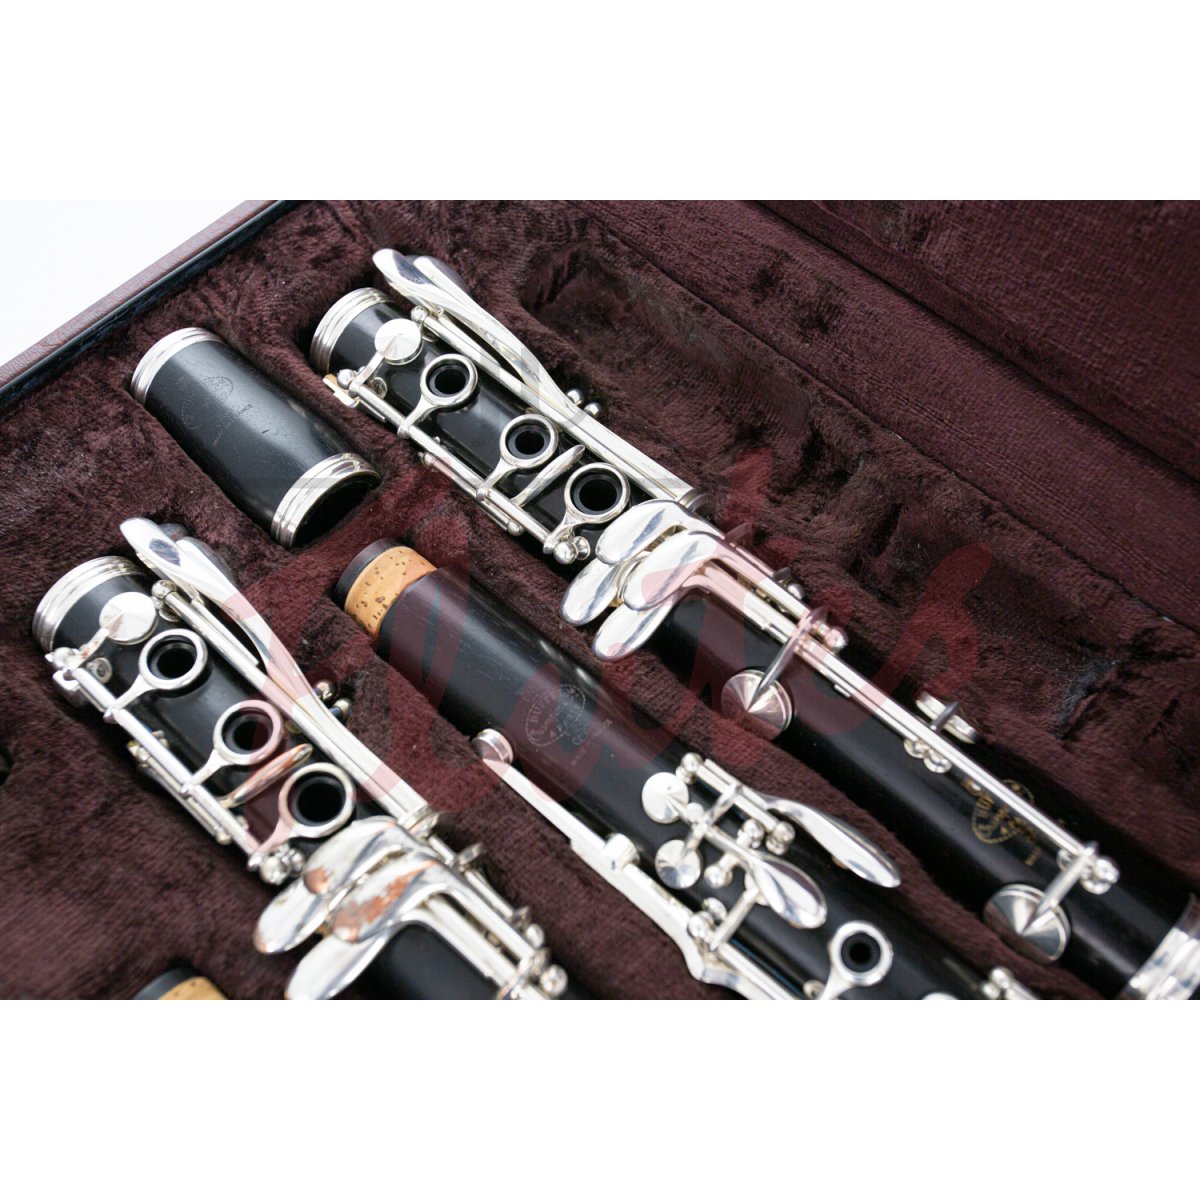 buffet clarinet serial numbers 182283